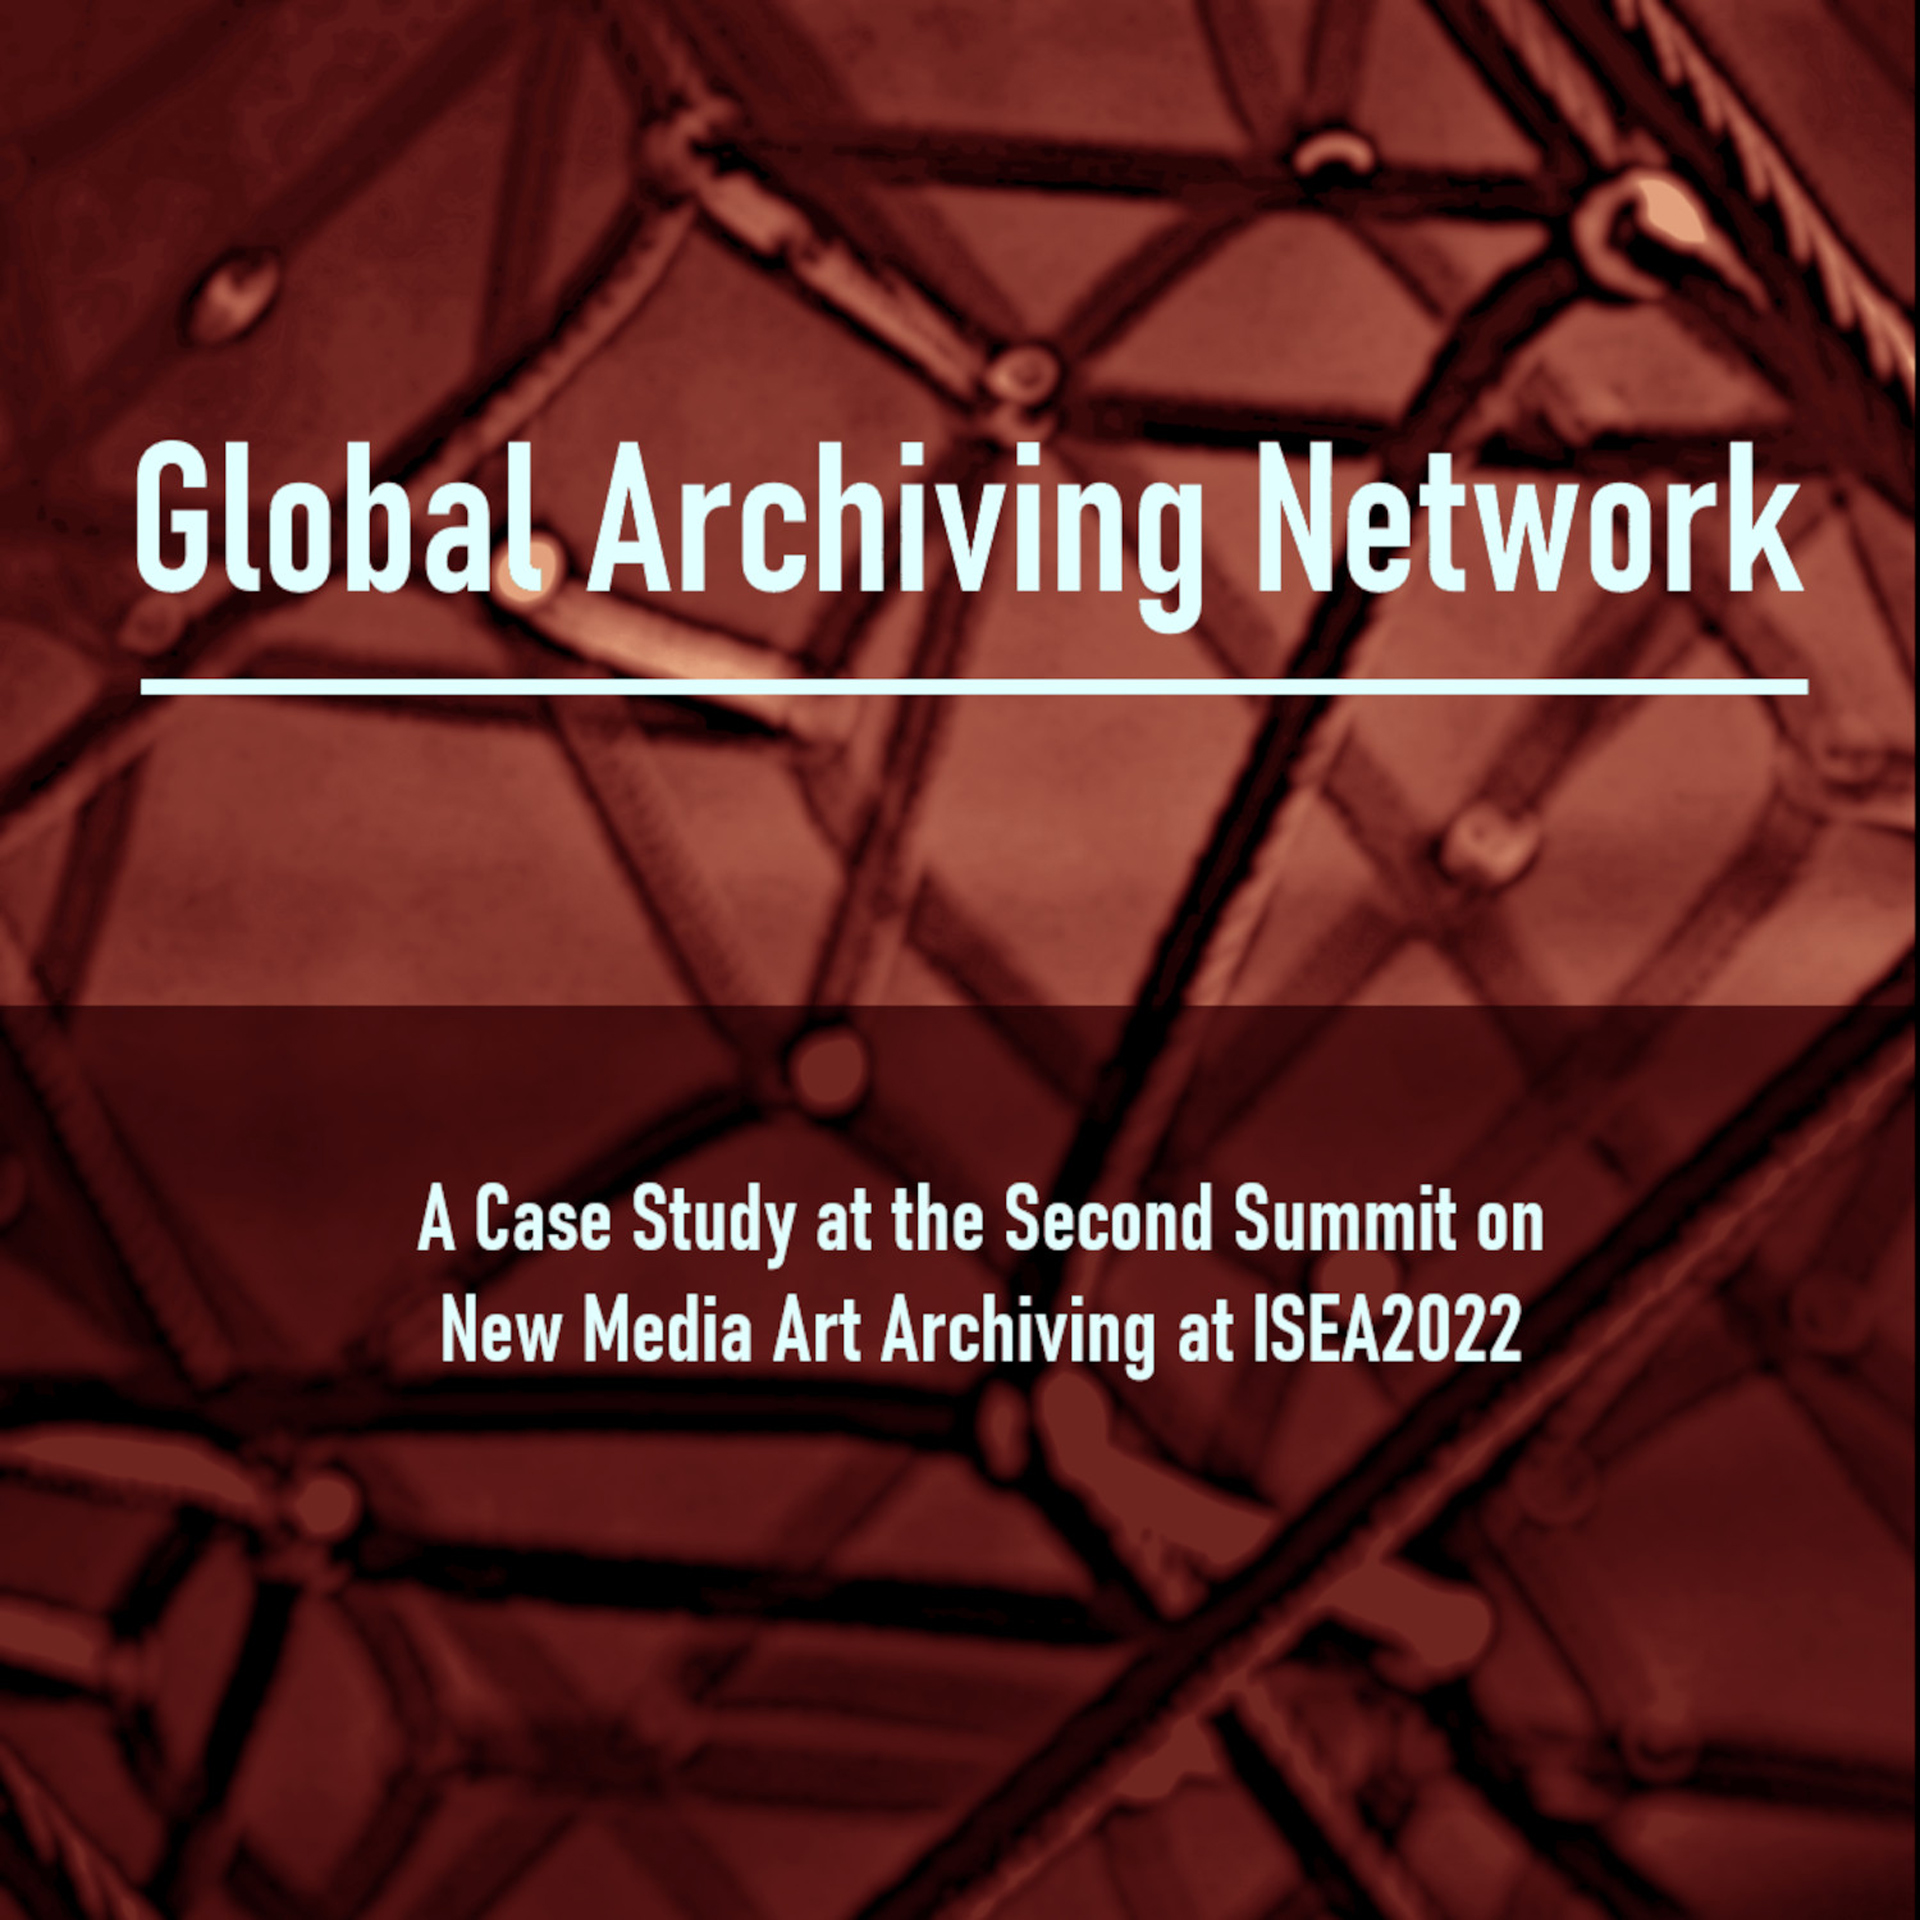 ©ISEA2022: 27th International Symposium on Electronic Art, Terry C. W. Wong, Global Archiving Network: A Case Study at the Second Summit on New Media Art Archiving at ISEA2022”